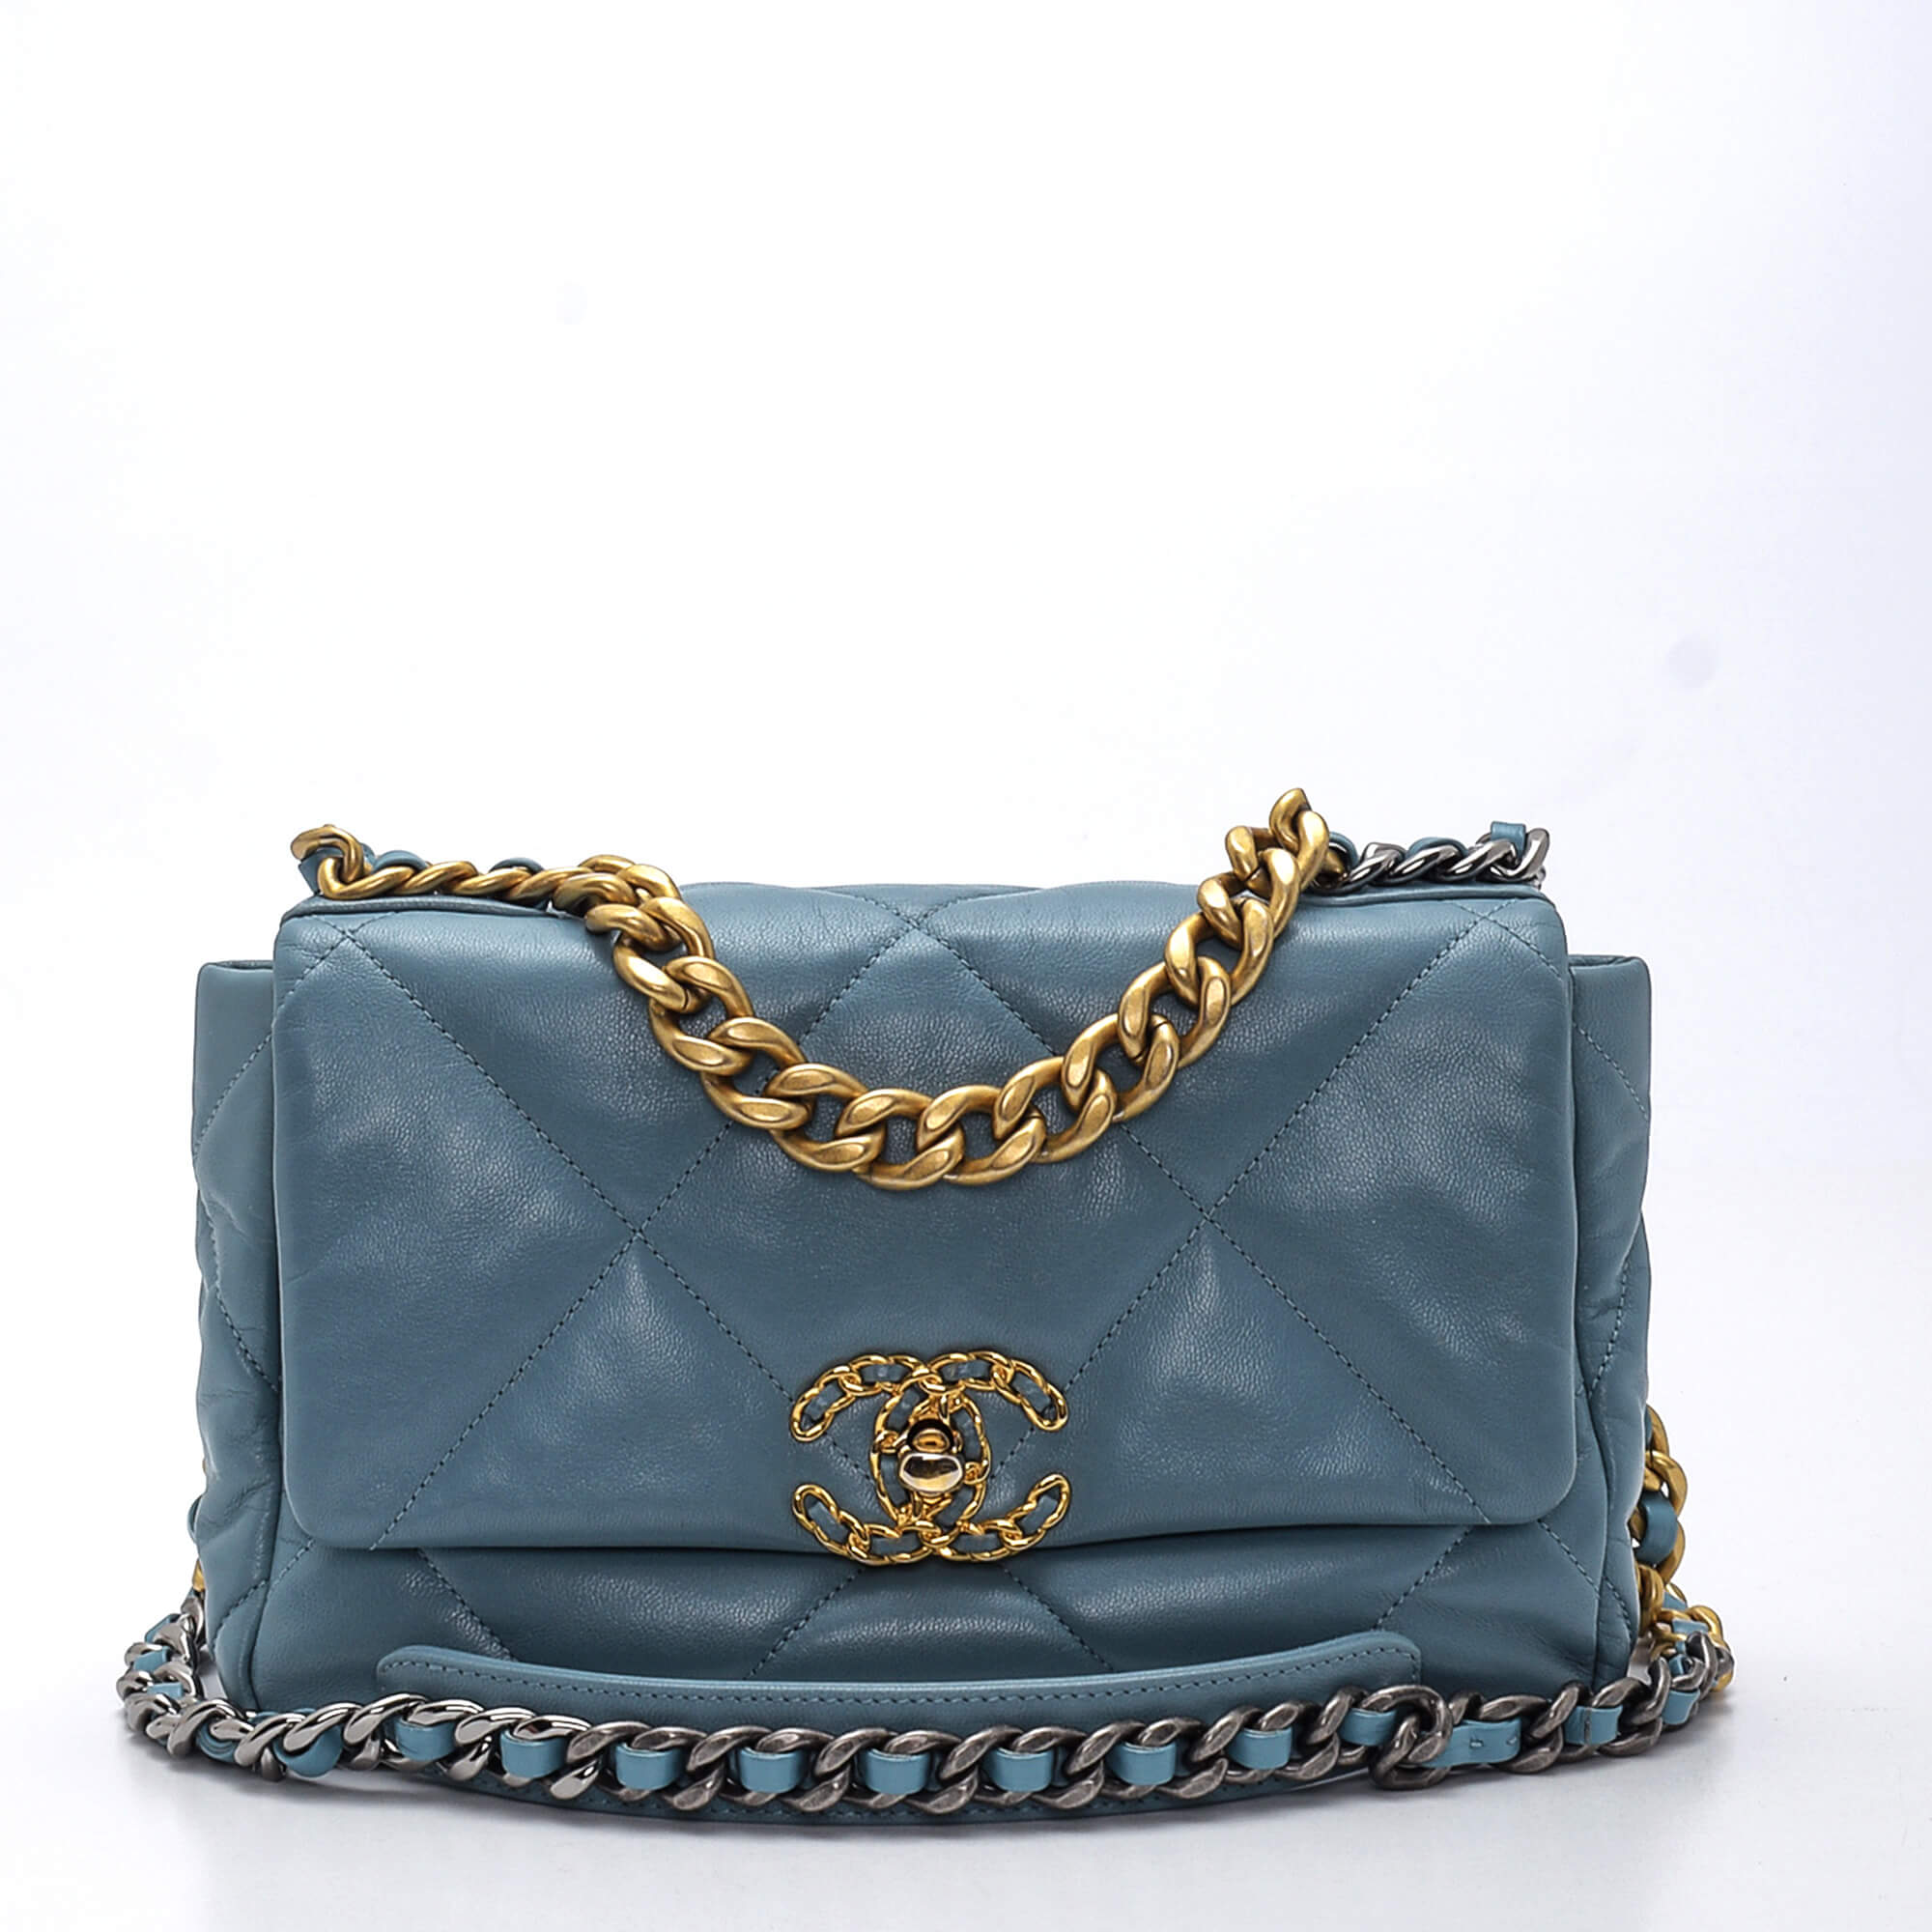 Chanel - Blue Quilted Lambskin Leather No 19 Bag 